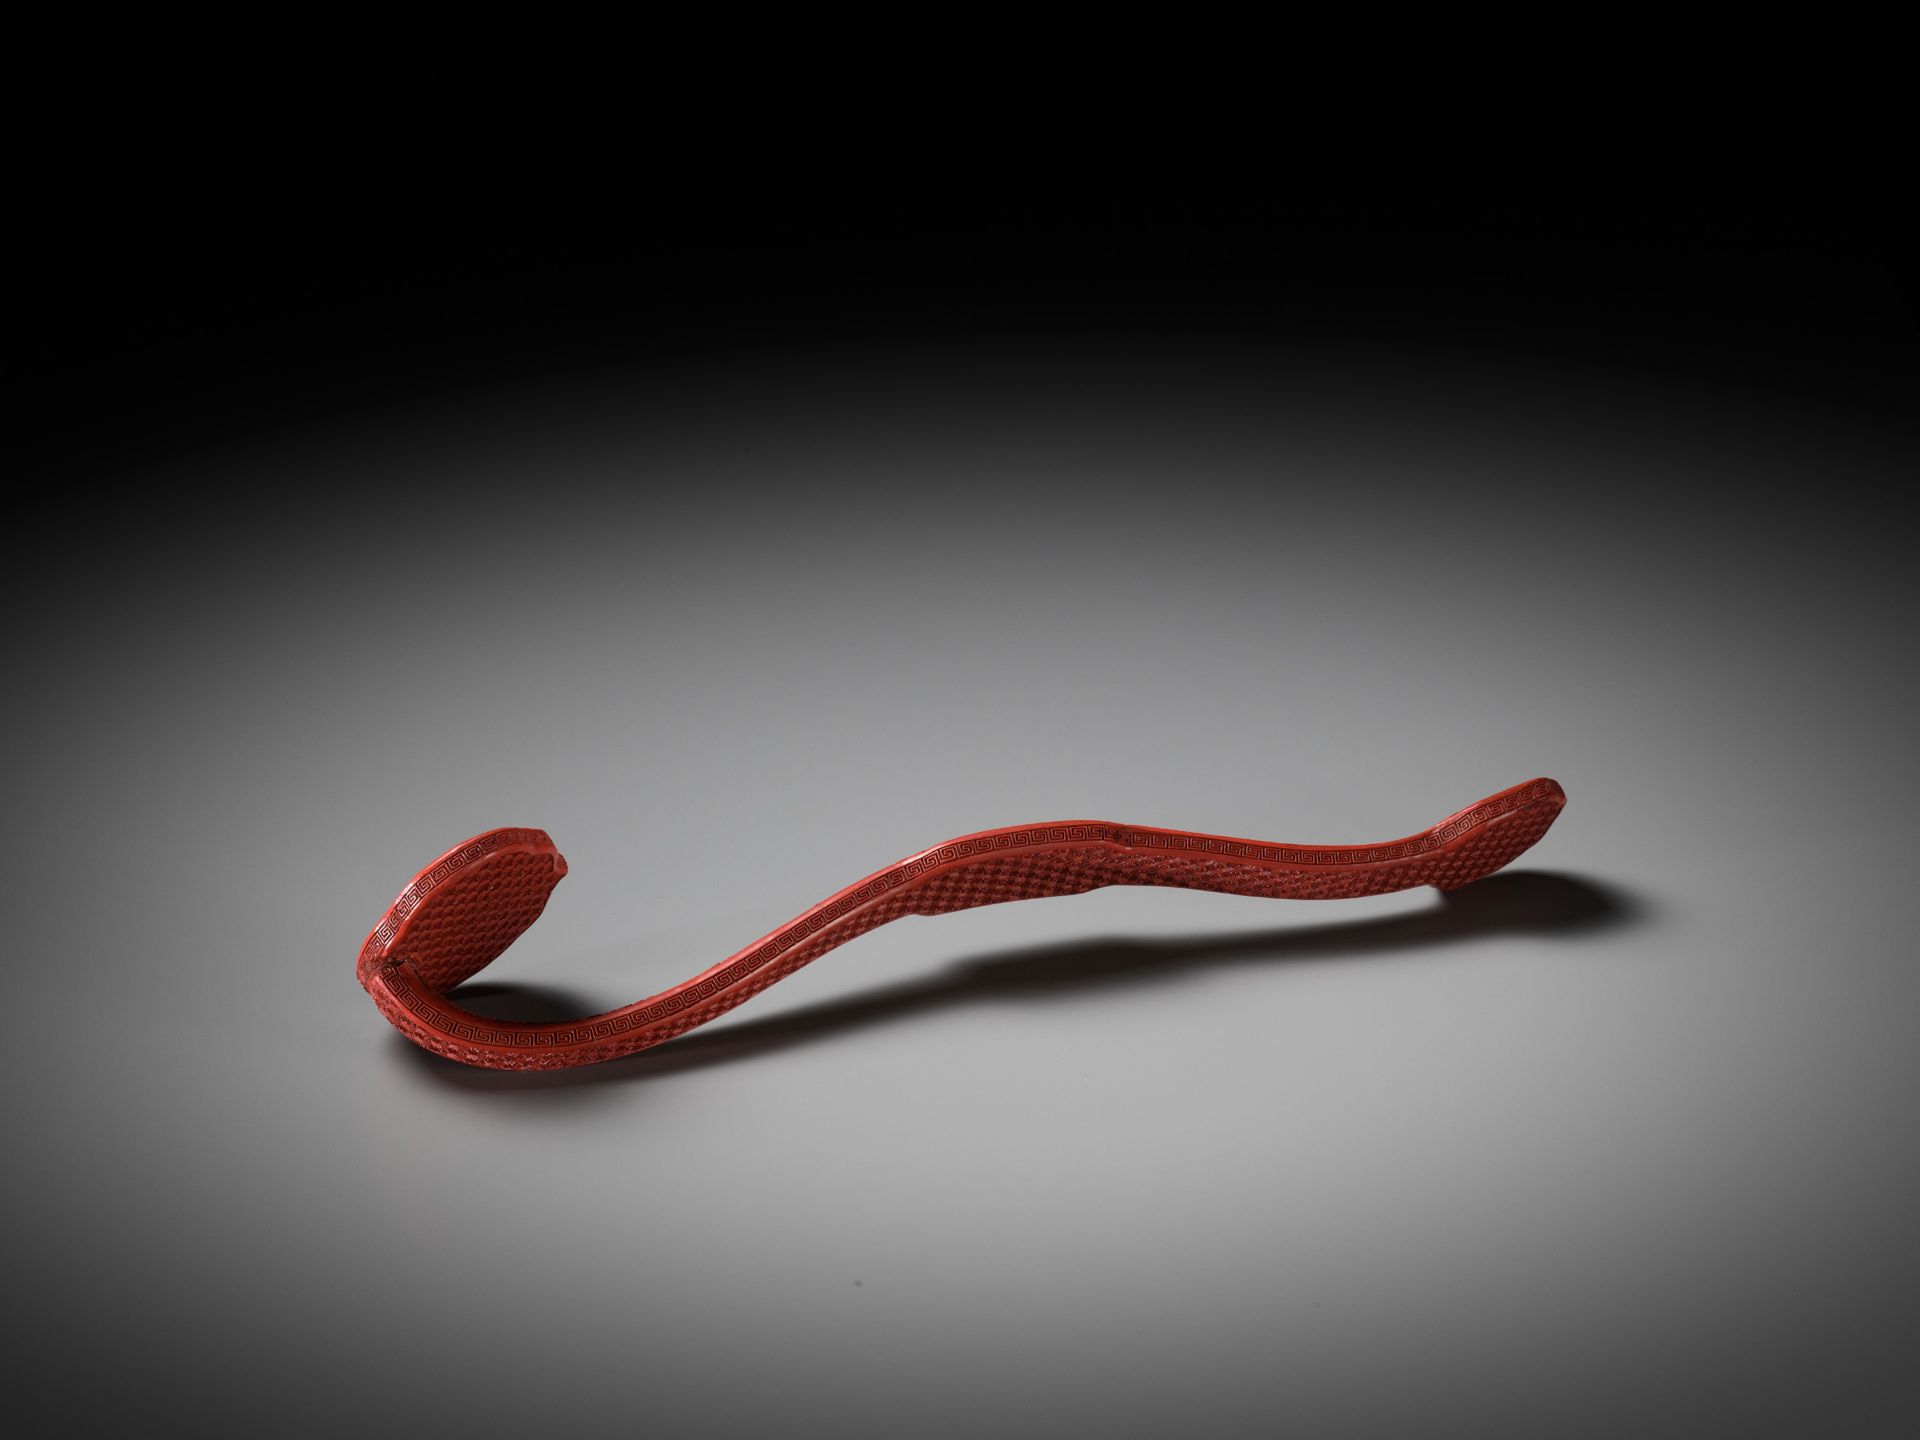 A CARVED CINNABAR LACQUER 'BAJIXIANG' RUYI SCEPTER, QING DYNASTY - Image 7 of 10